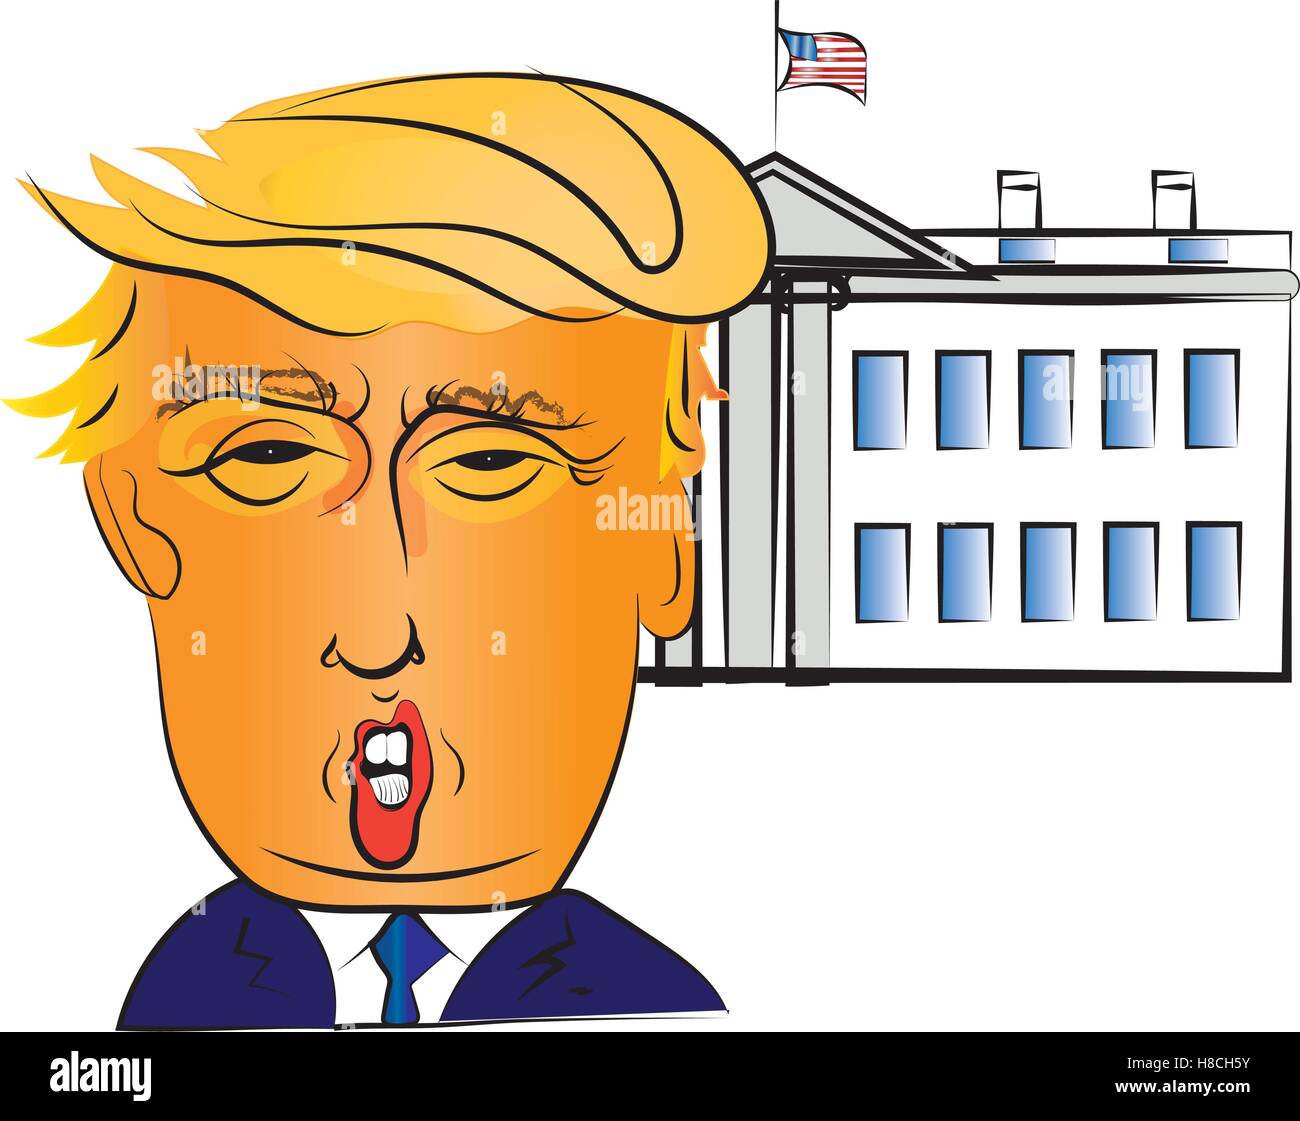 Character portrait of Donald Trump, the 45th president of the United States, with the White House building in background Stock Vector